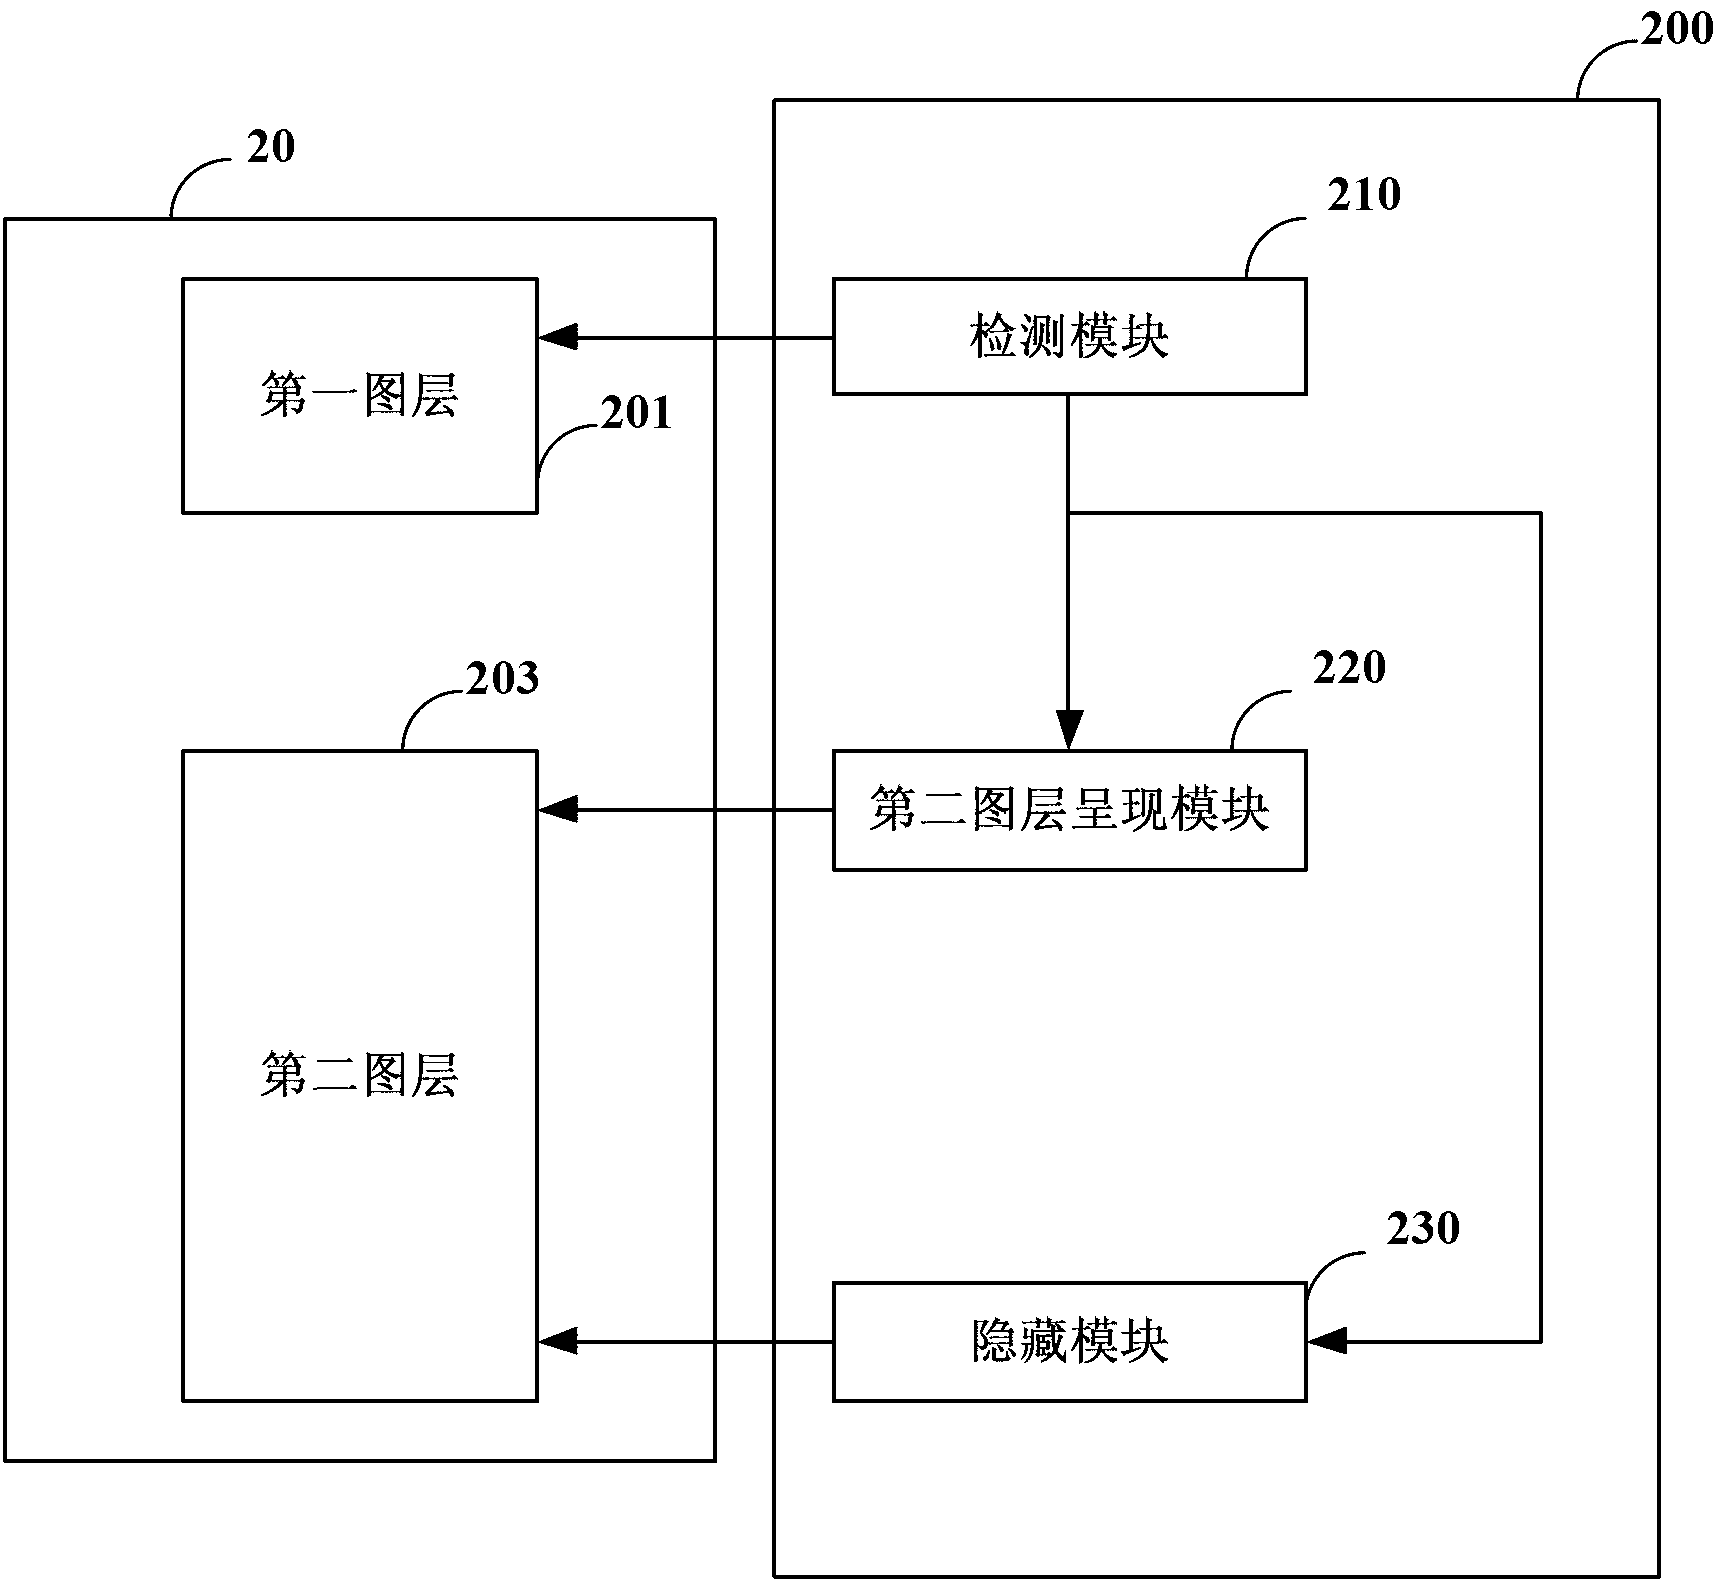 Method and equipment for displaying page